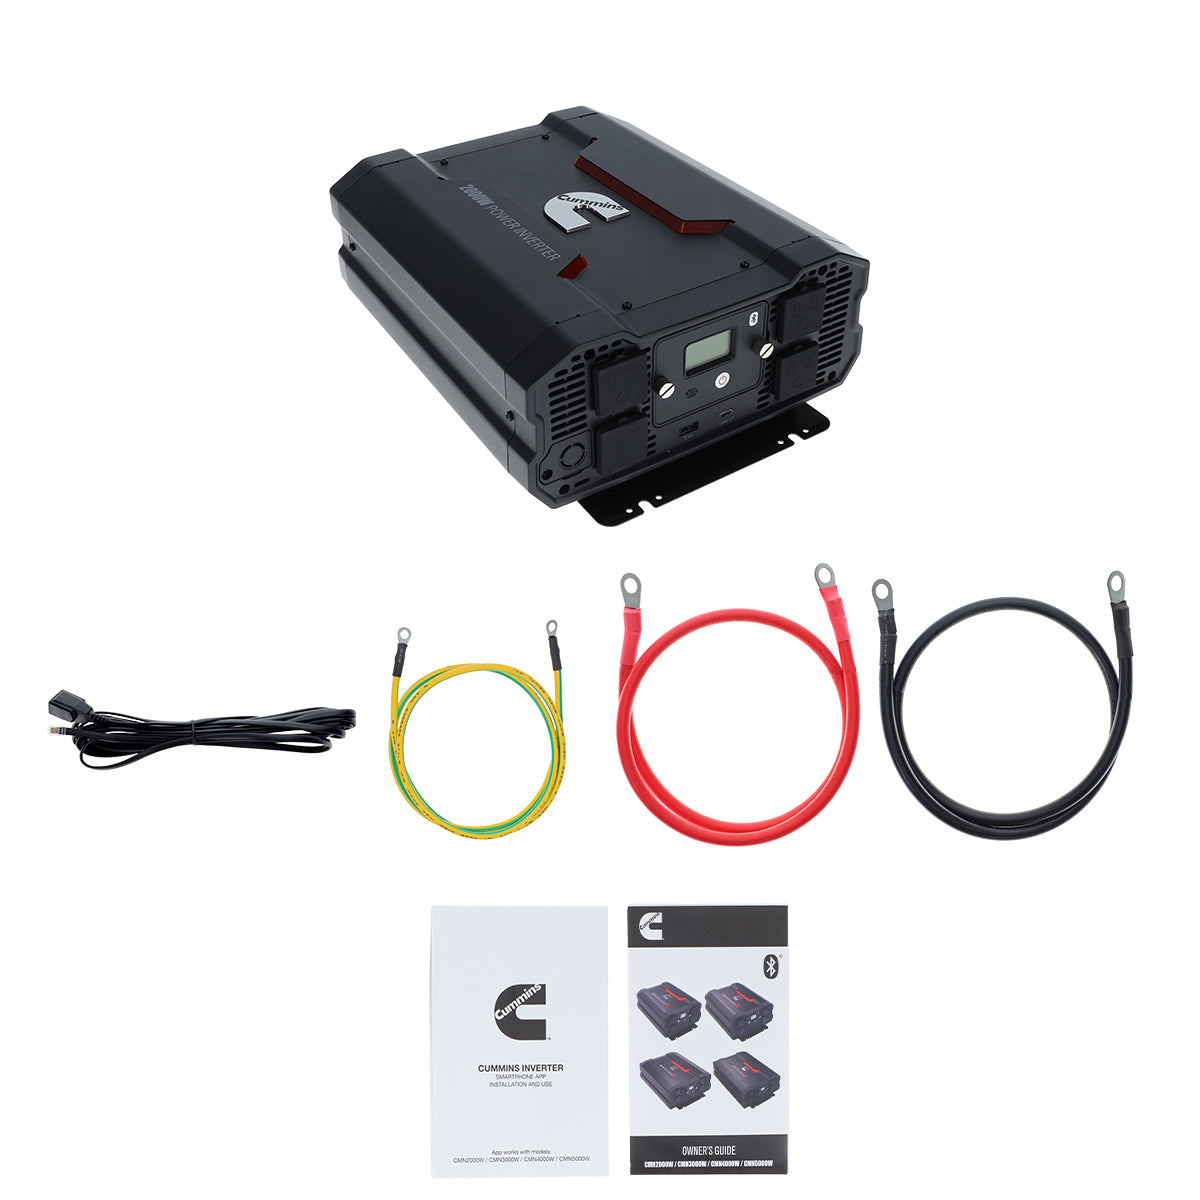 Cummins 2000 Watt Power Inverter Modified Sine Wave Truck Inverter 12V to 110 Volts Four AC Outlets Two USB Ports (Full Cable Kit Included)